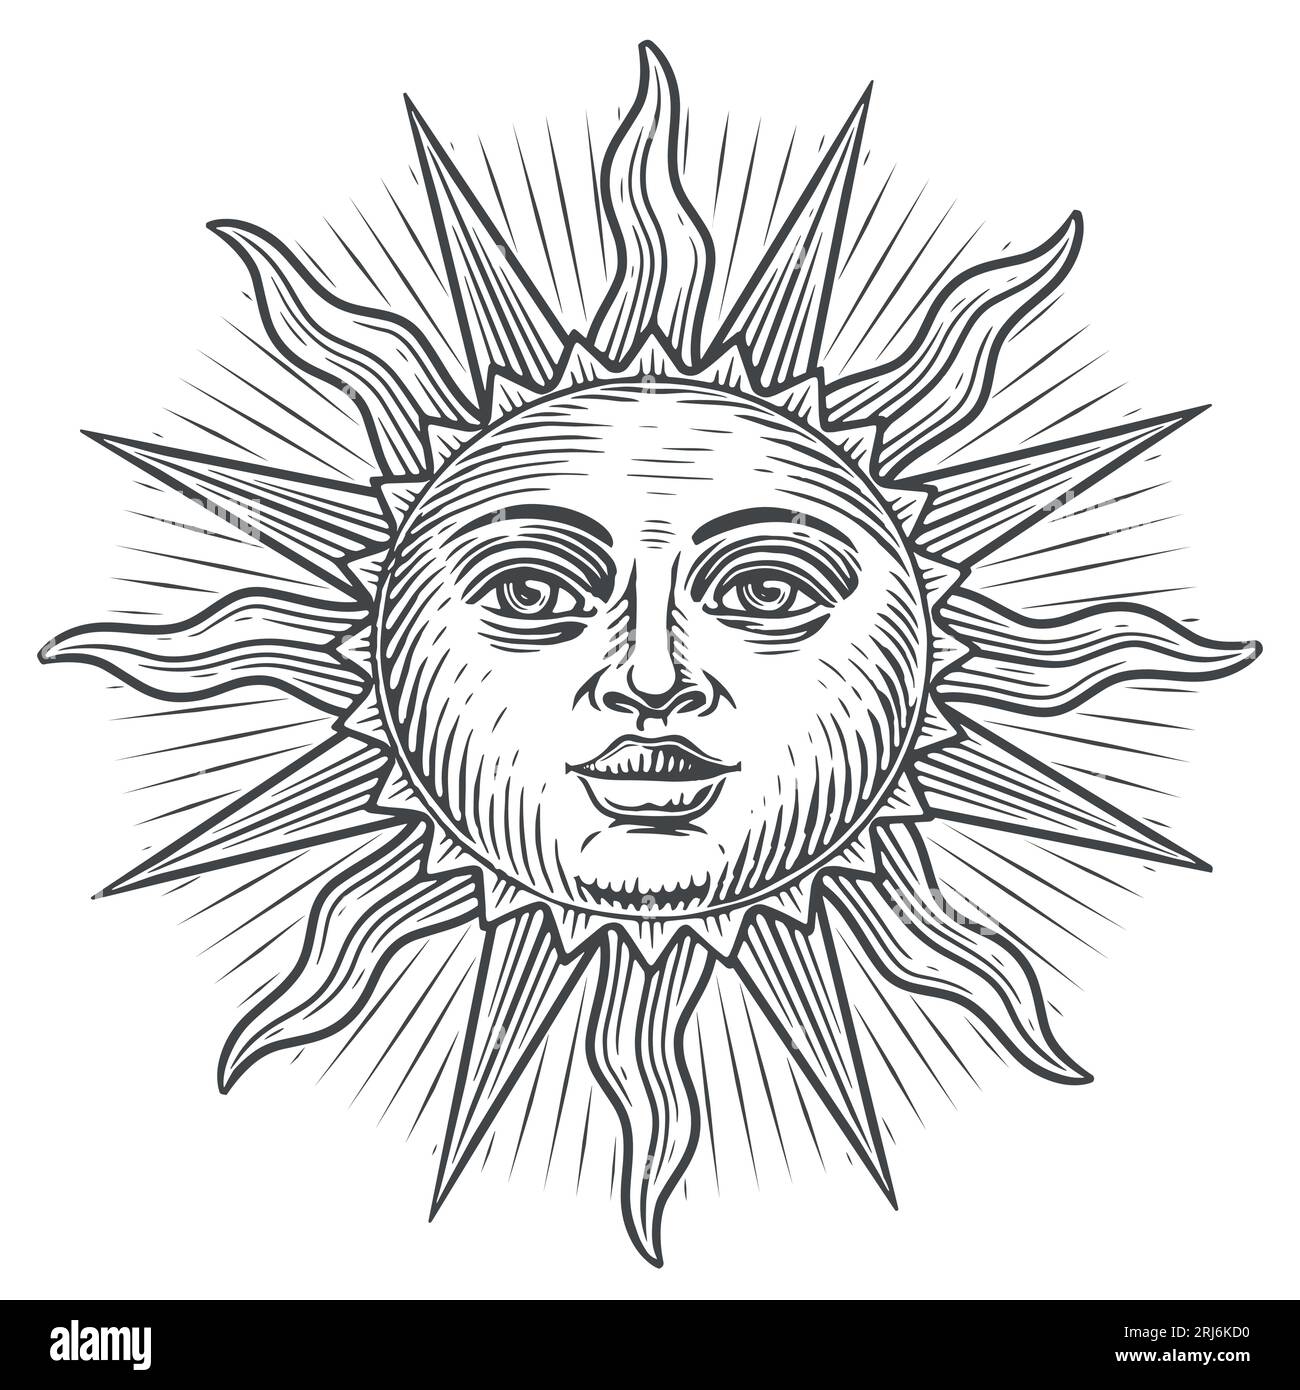 Boho sun with face. Astrology, solar symbol. Esoteric and occult magic sign. Engraving vintage vector illustration Stock Vector